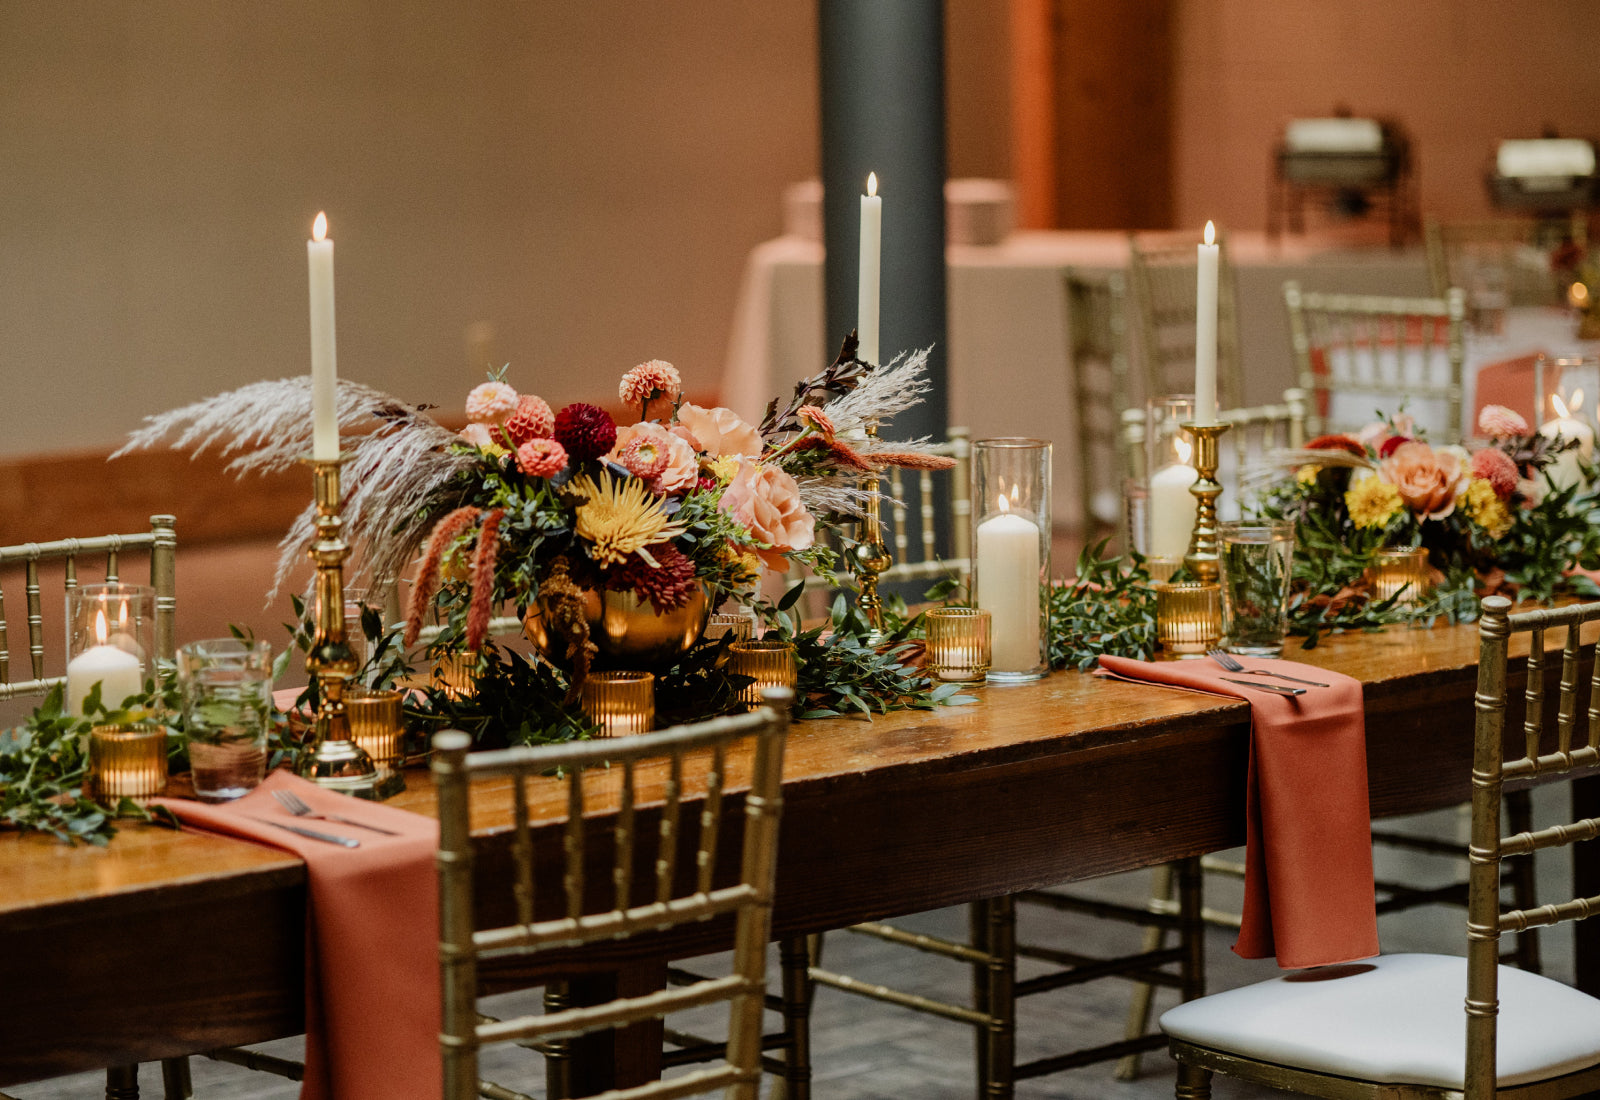 A long wooden table set with cream candles in brass holders with floral centerpieces